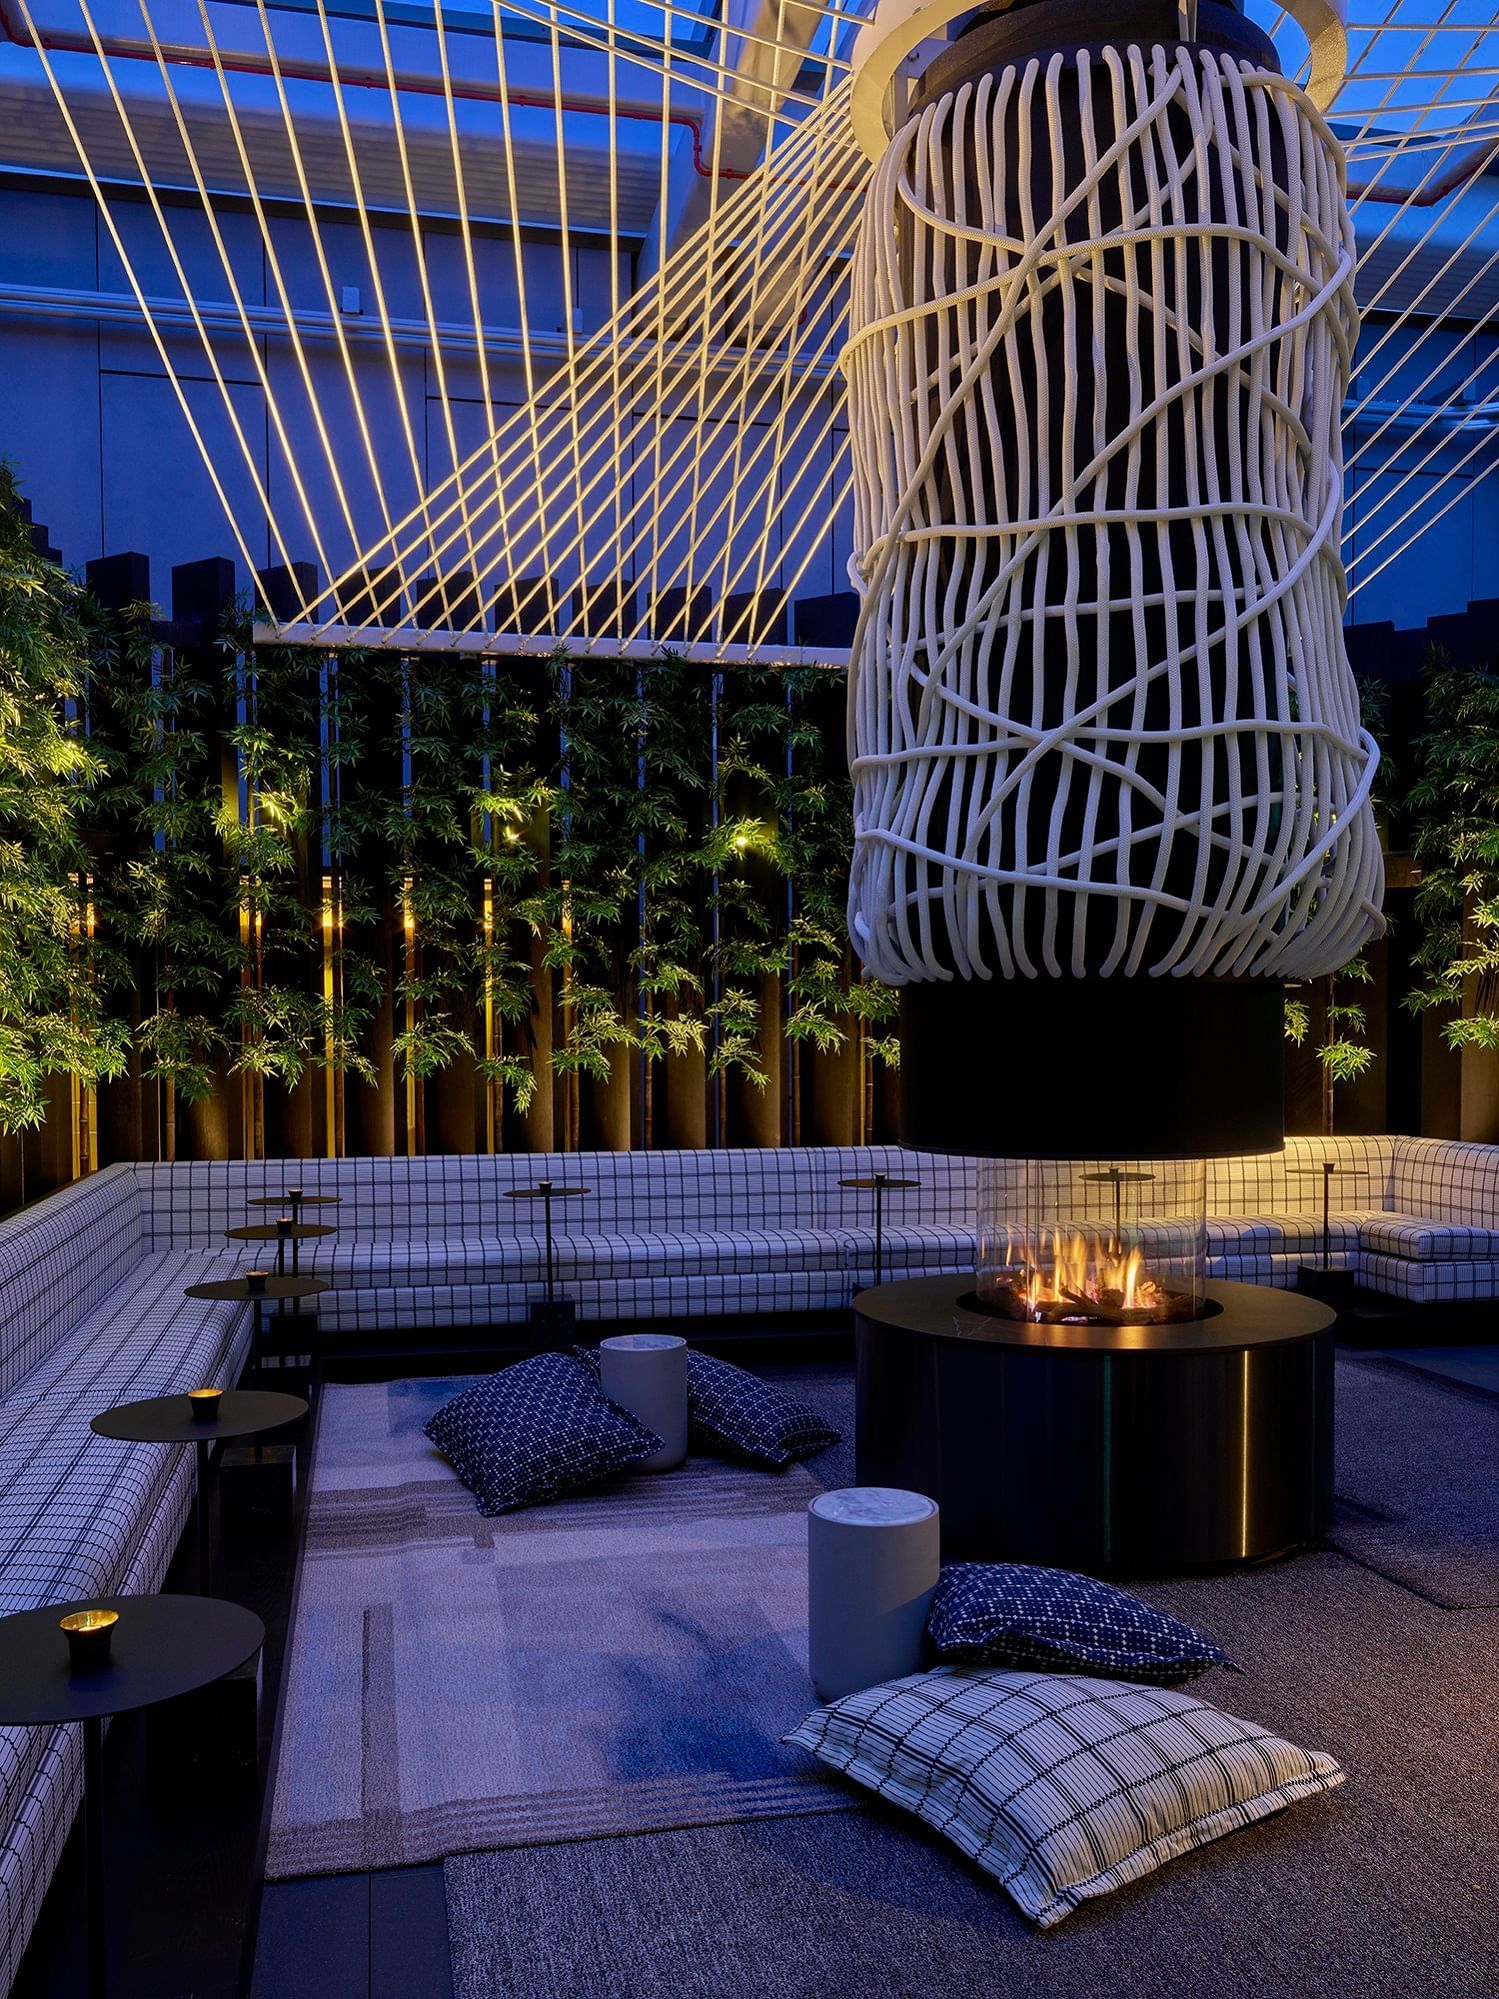 Concept design of the Rooftop bar The Londoner Hotel